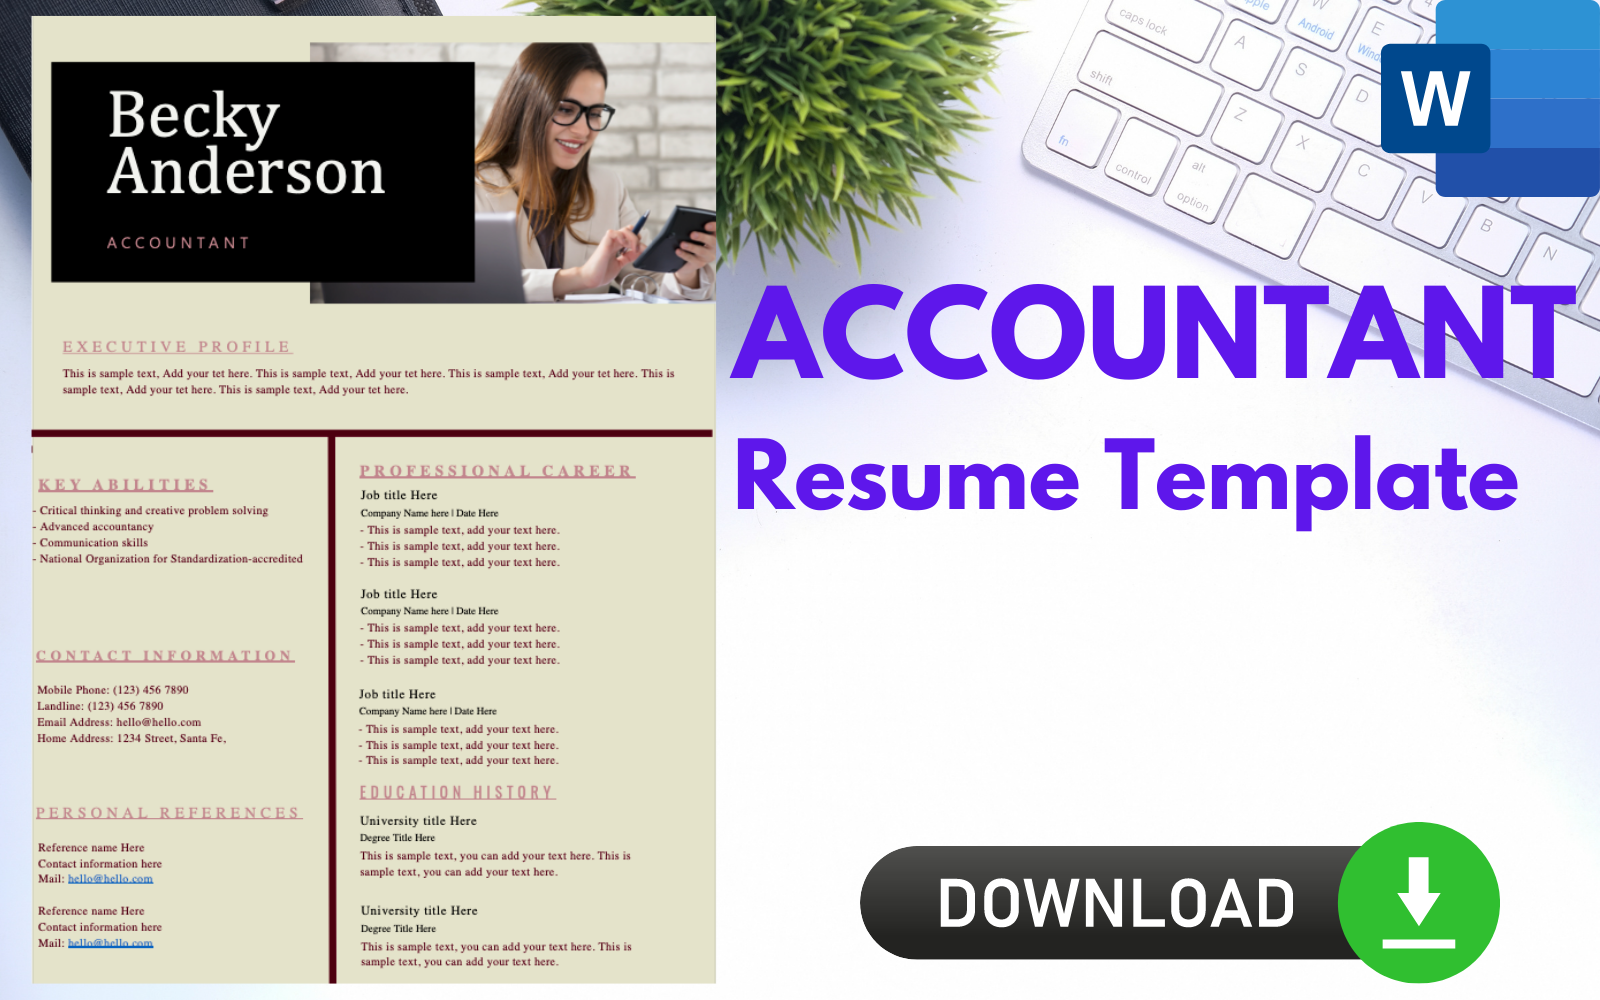 Professional Resume Template for ACCOUNTANTS